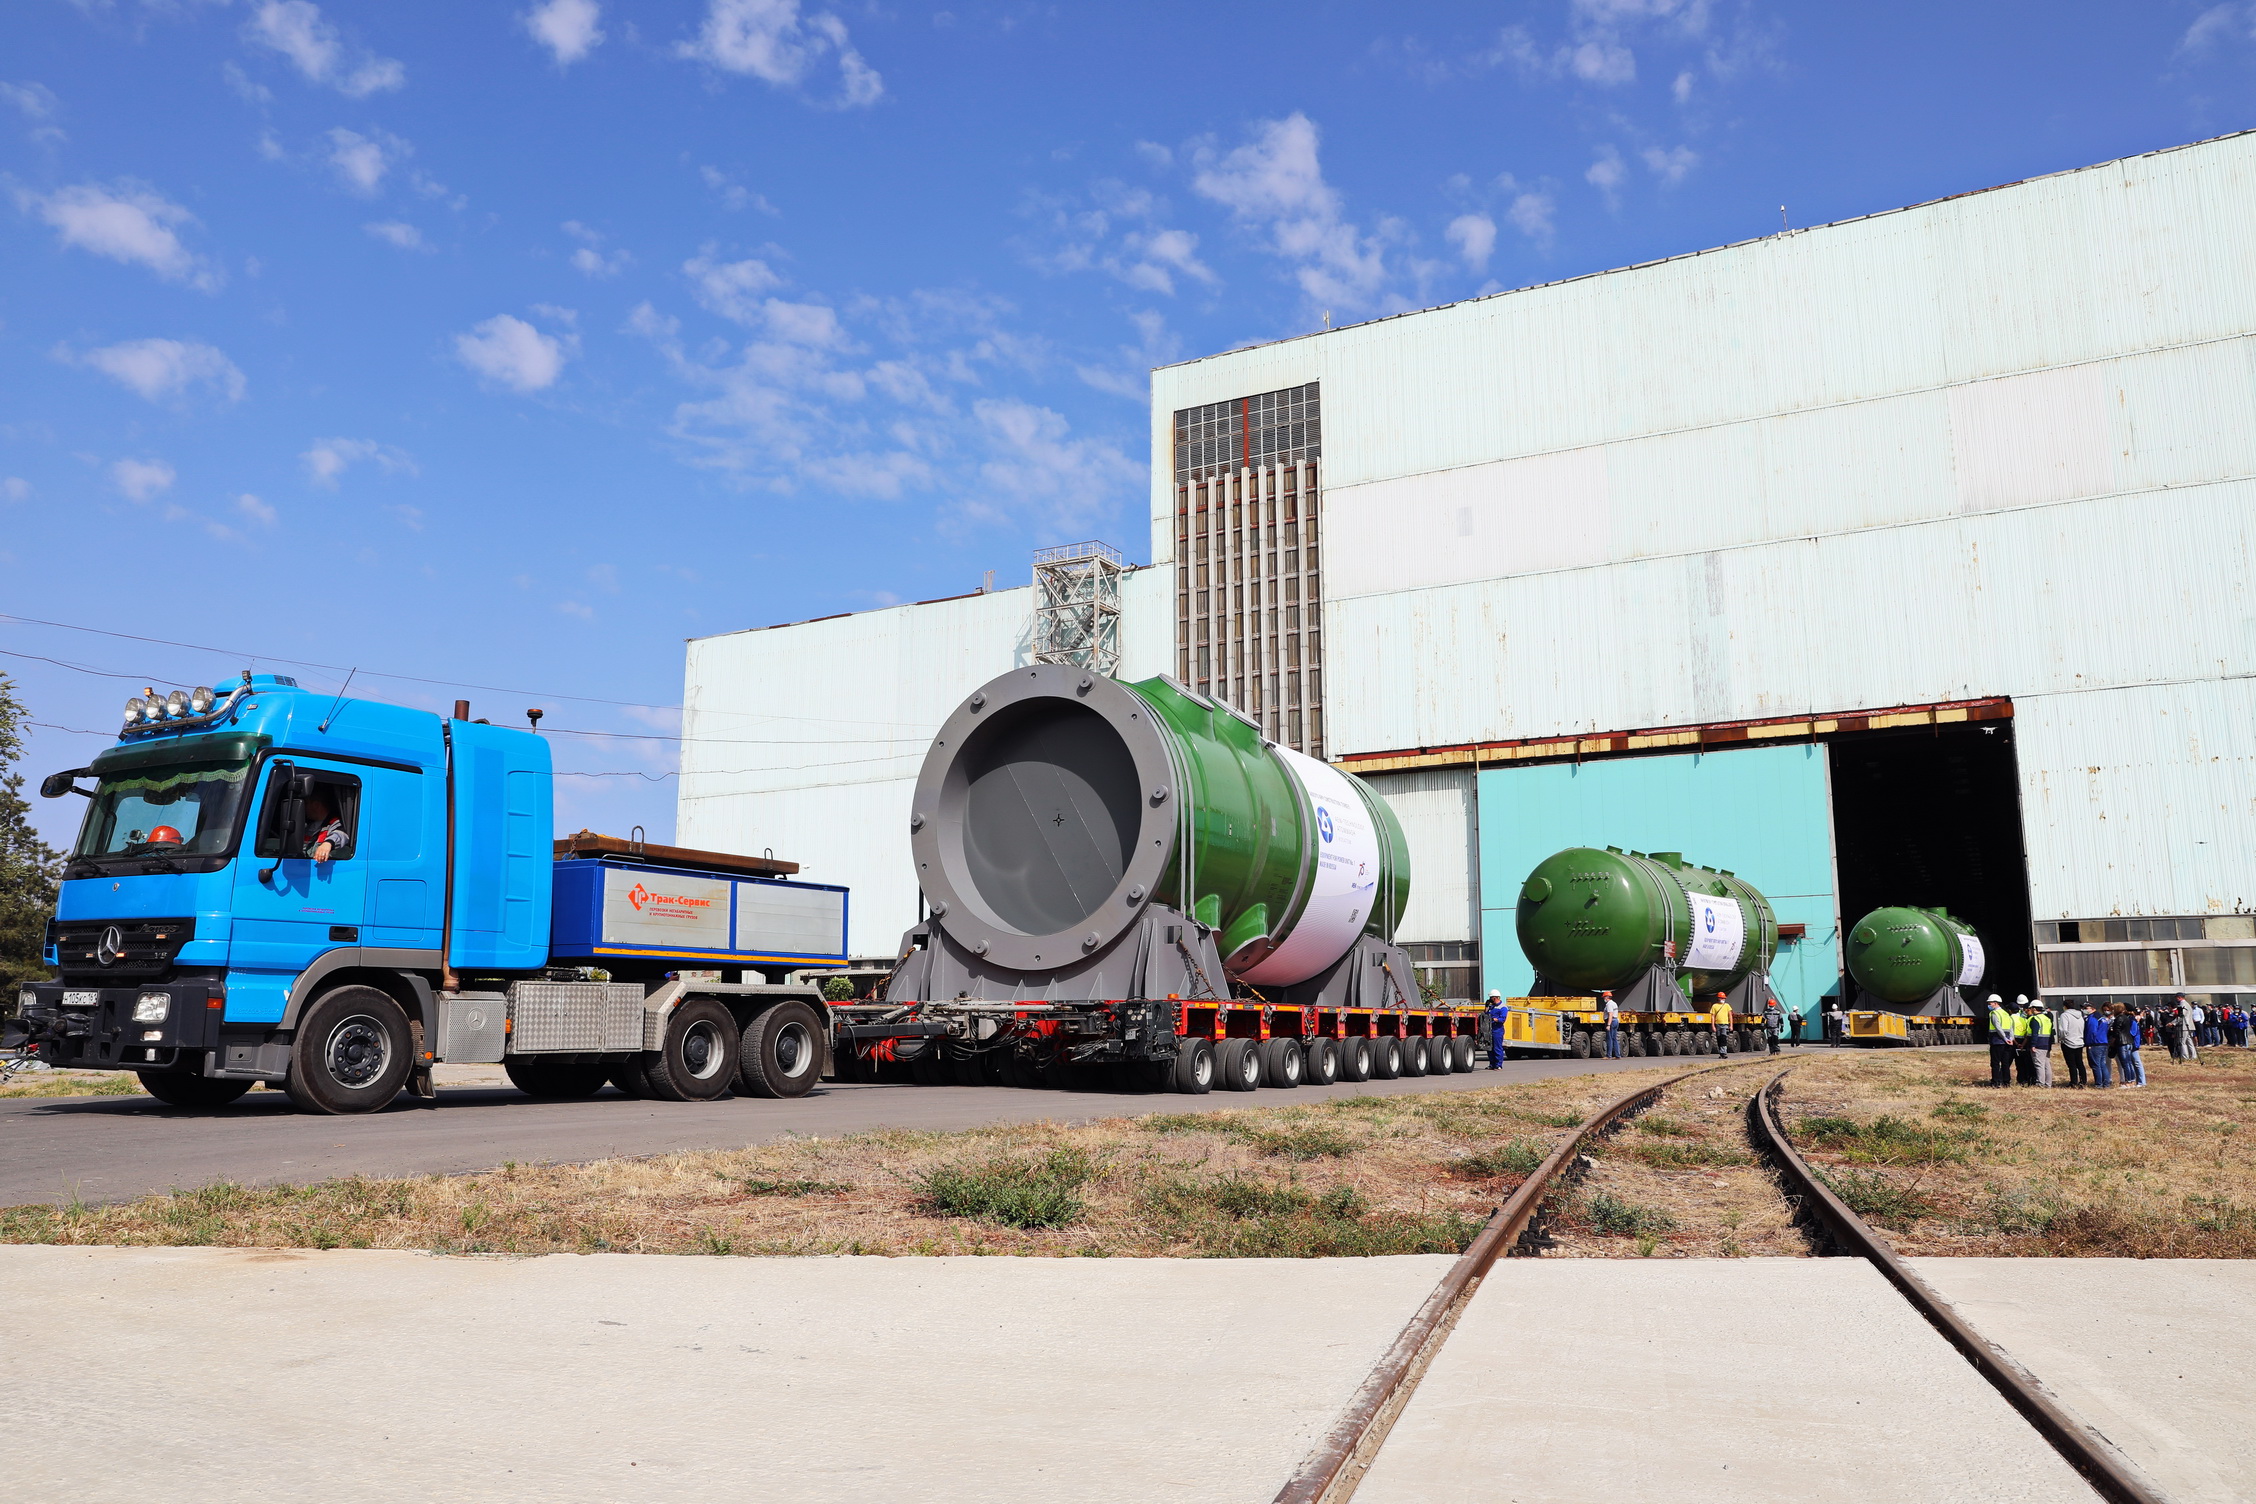 Atommash has shipped the first Reactor Pressure Vessel for the first nuclear power plant under construction in the Republic of Turkey